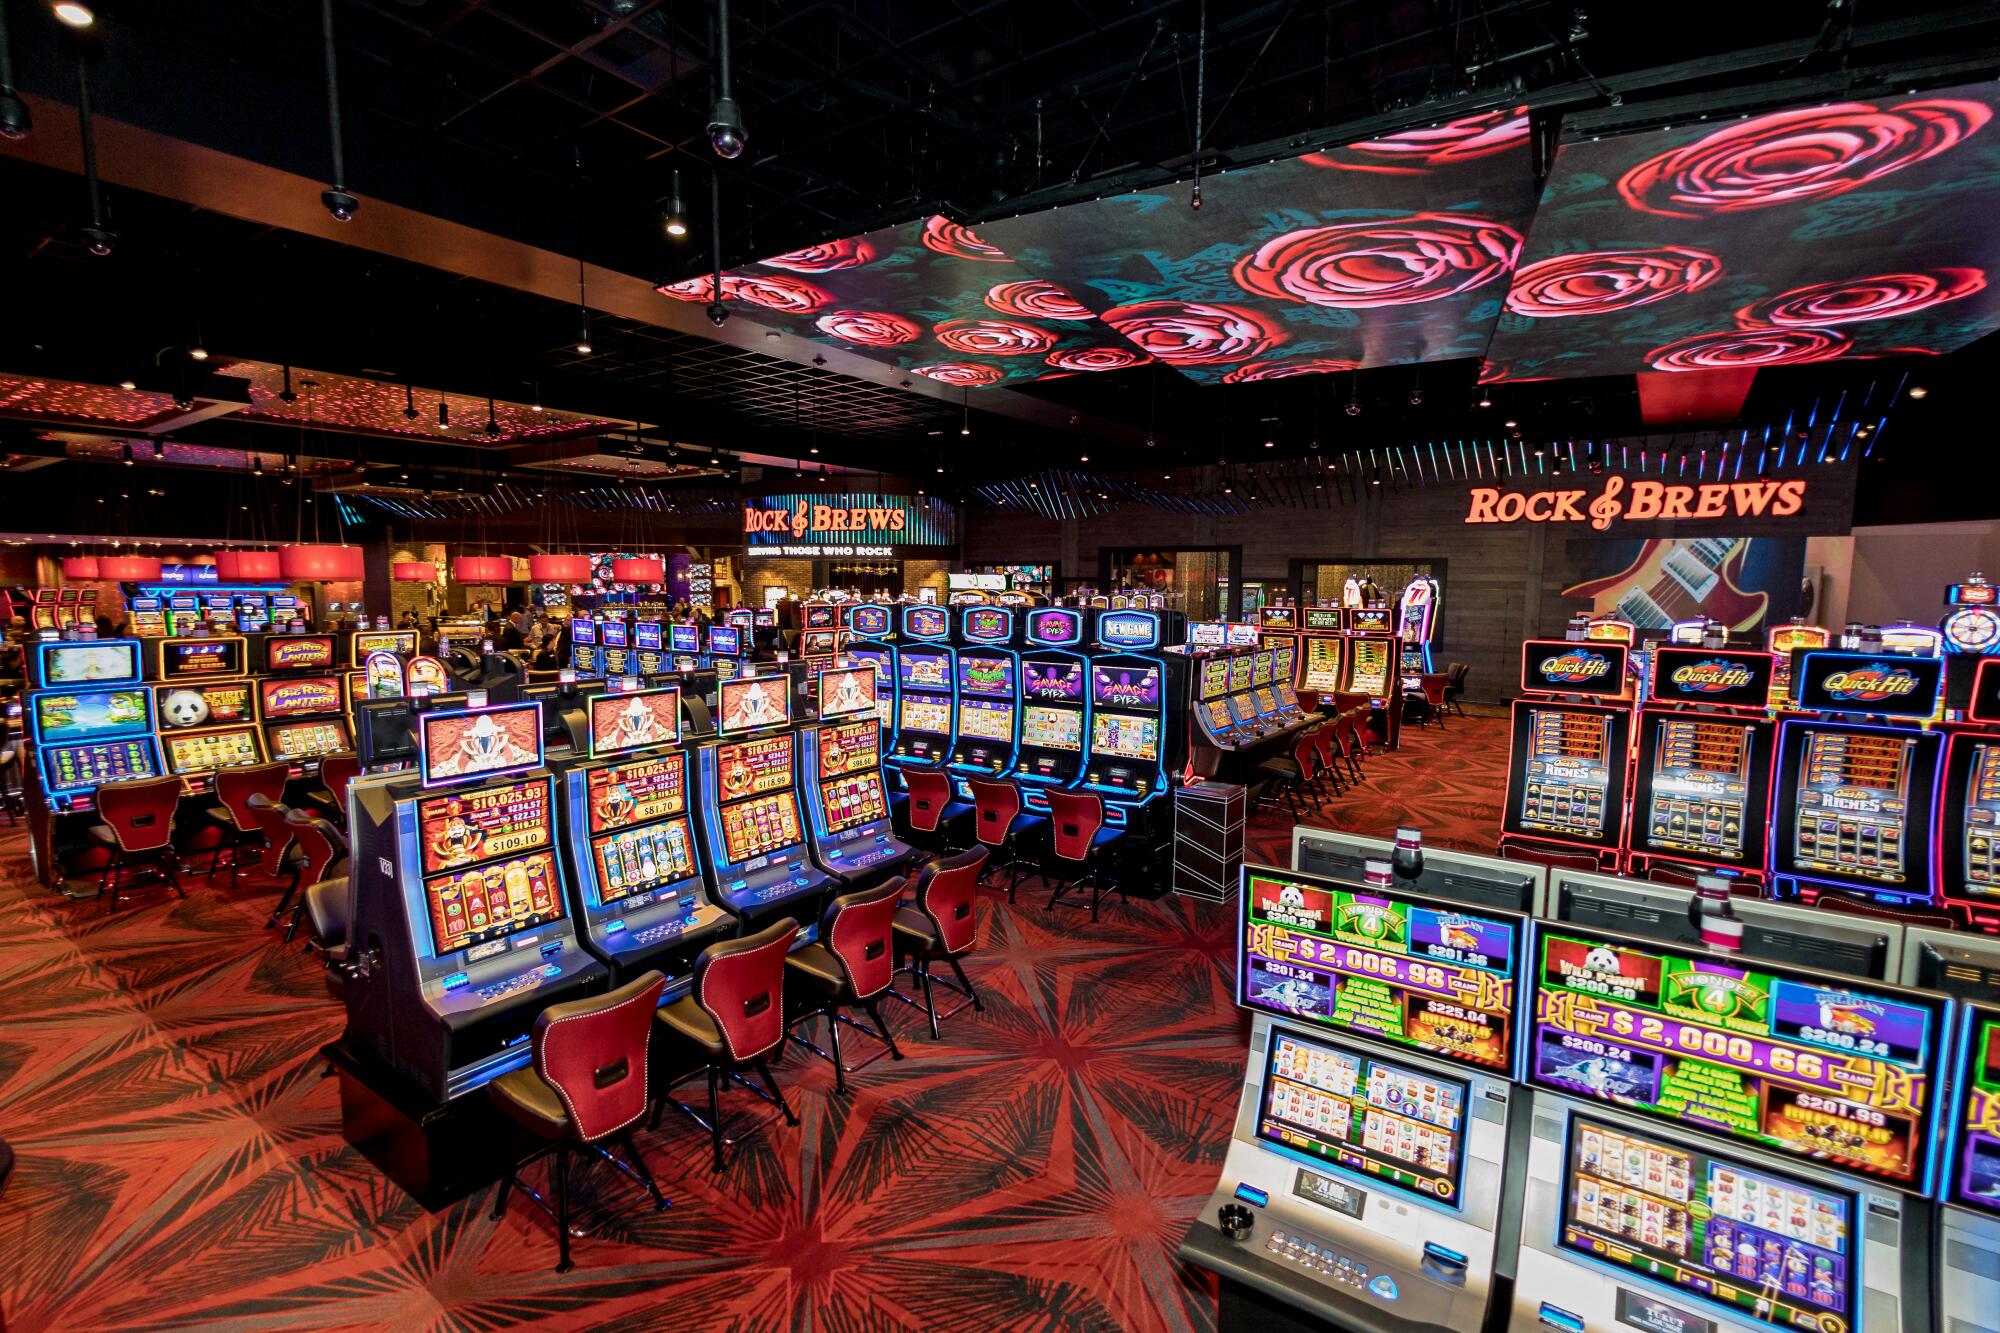 A casino floor with slot machines